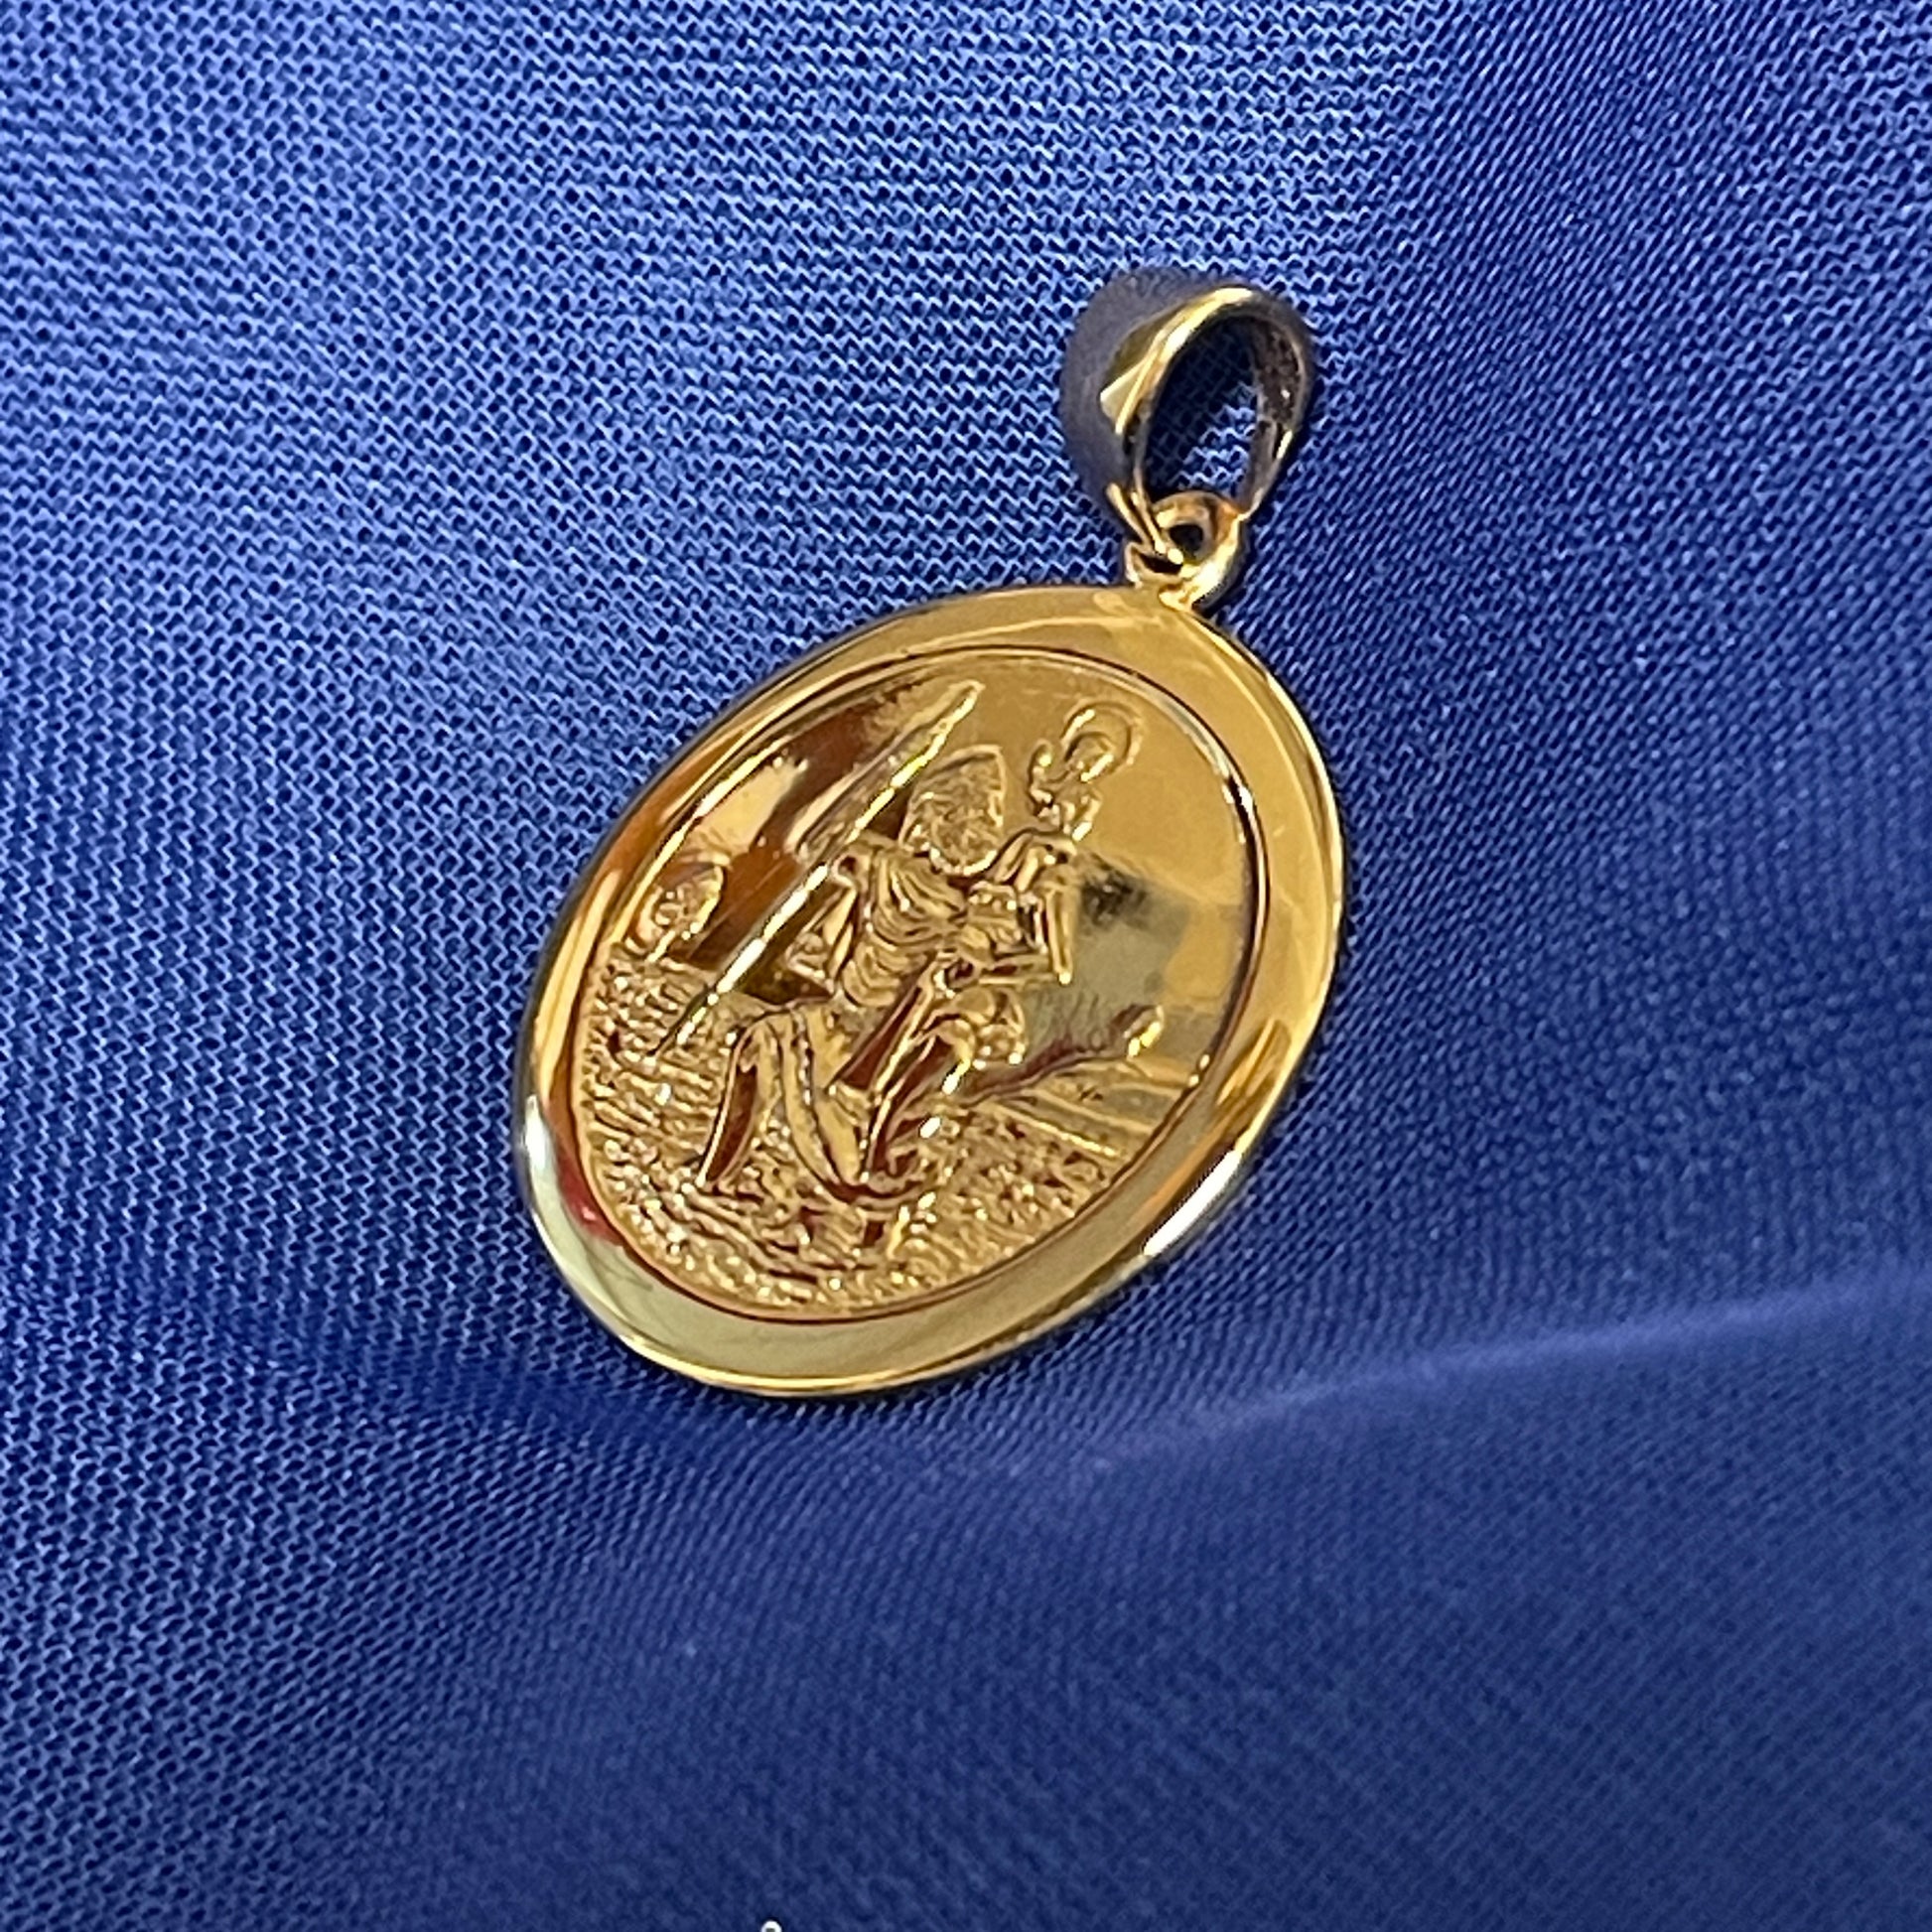 St. Christopher solid round 9 carat yellow gold 19 mm